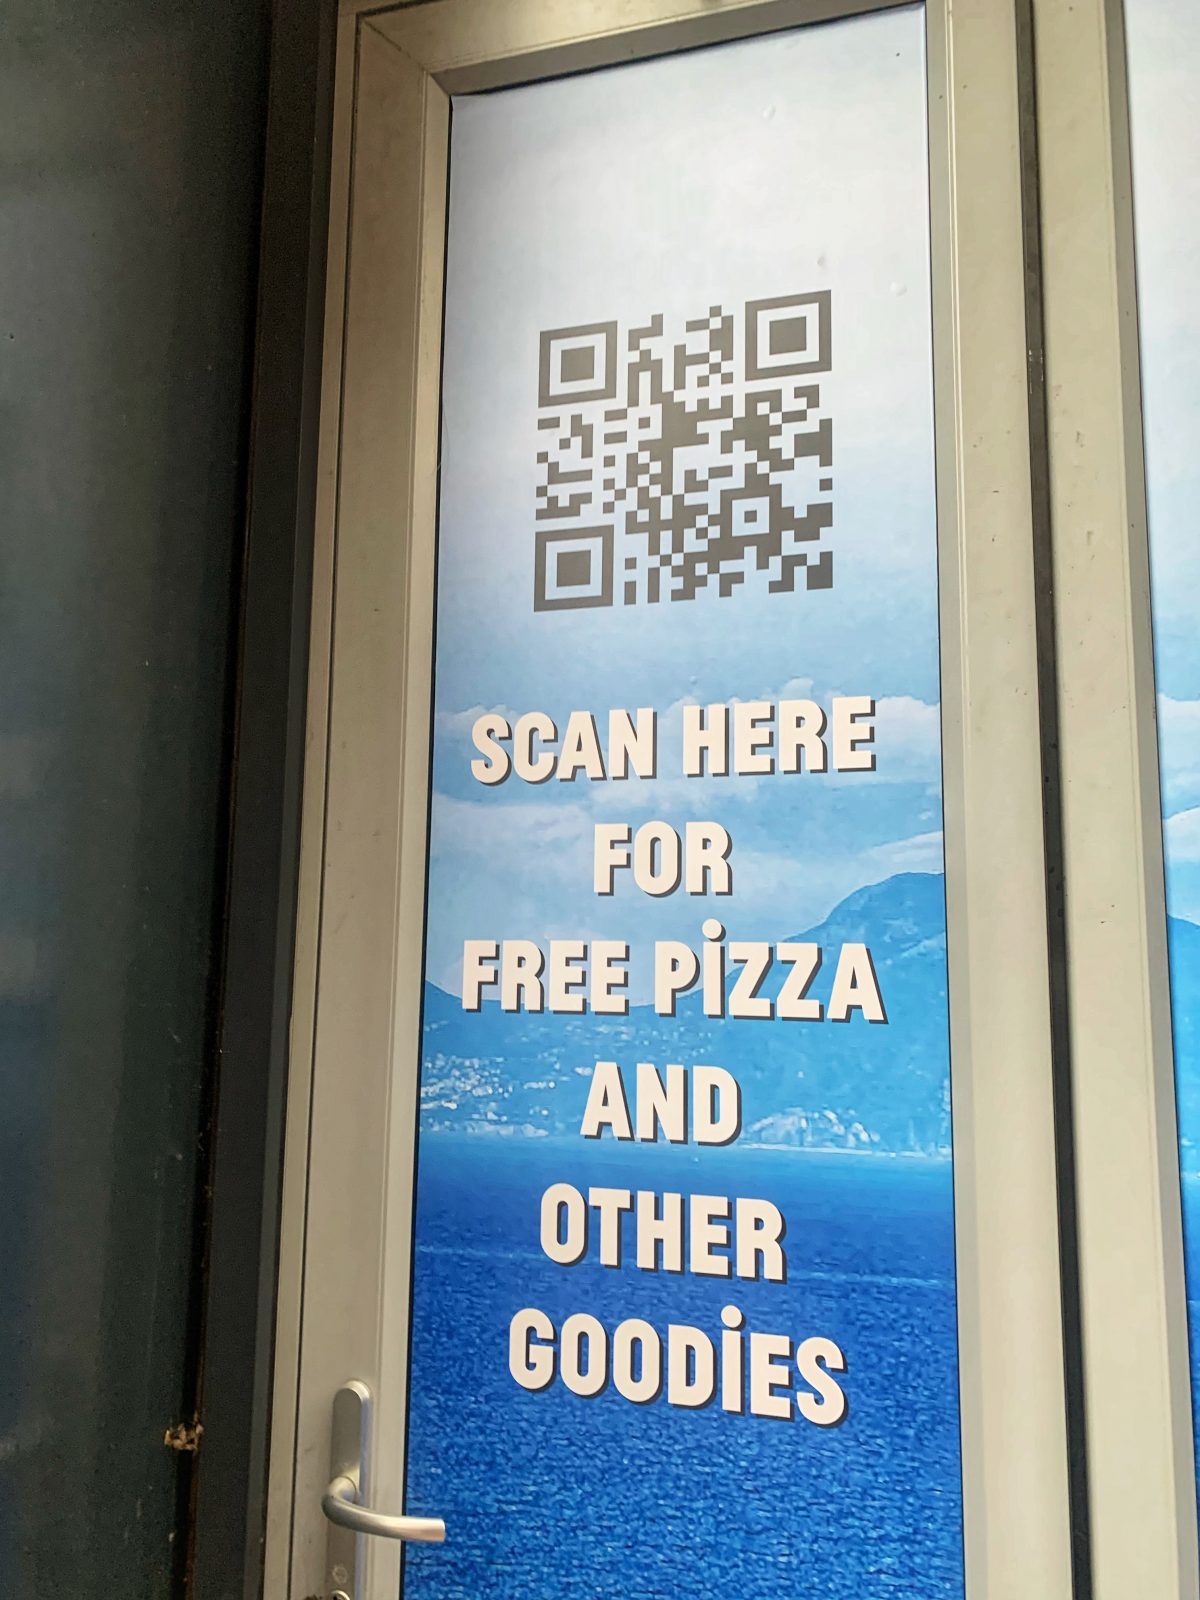 sign reads 'scan here for free pizza and other goodies' next to QR code.